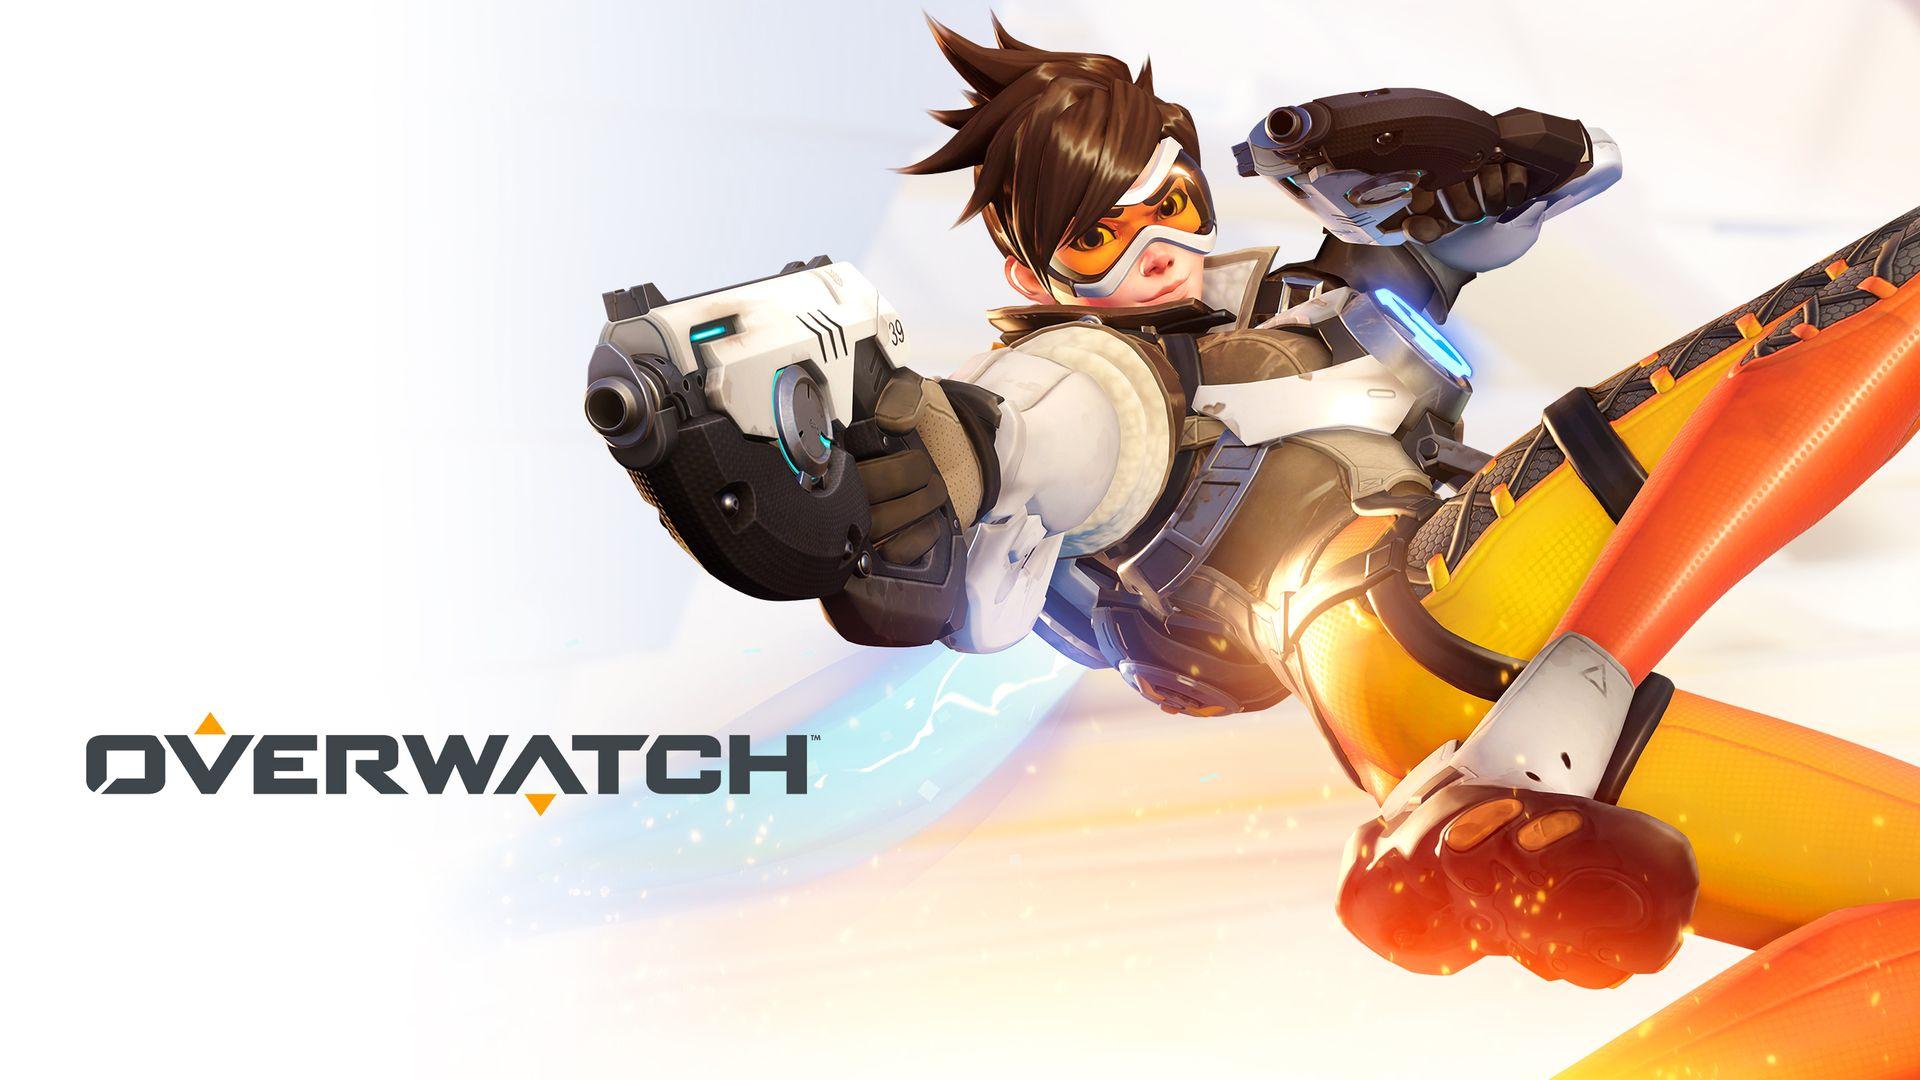 Overwatch Tracer Wallpapers Wallpaper Cave Here you can find the best overwatch 4k wallpapers uploaded by our community. overwatch tracer wallpapers wallpaper